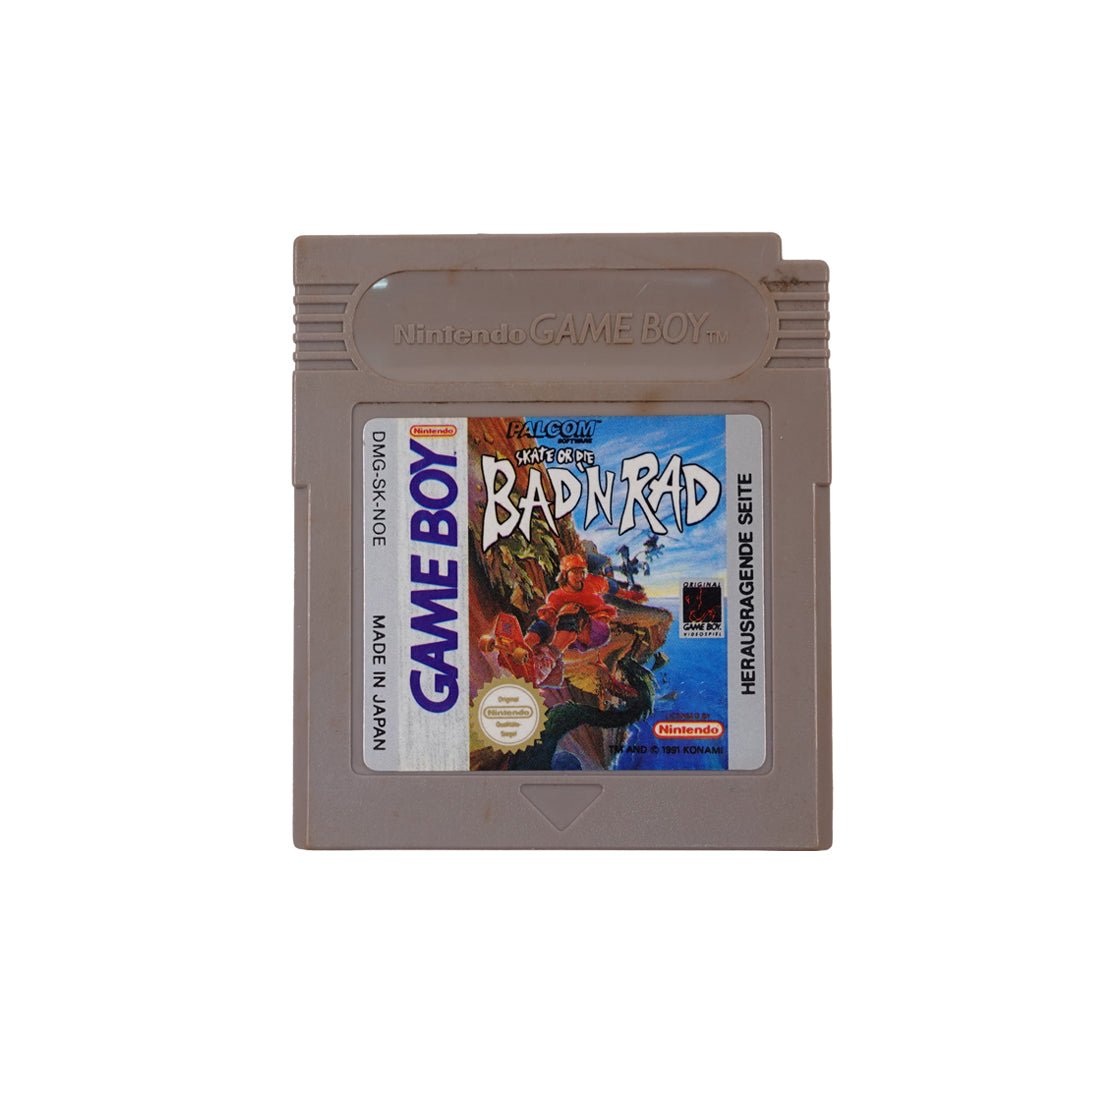 (Pre-Owned) Bad N Rad - Gameboy Classic - Store 974 | ستور ٩٧٤